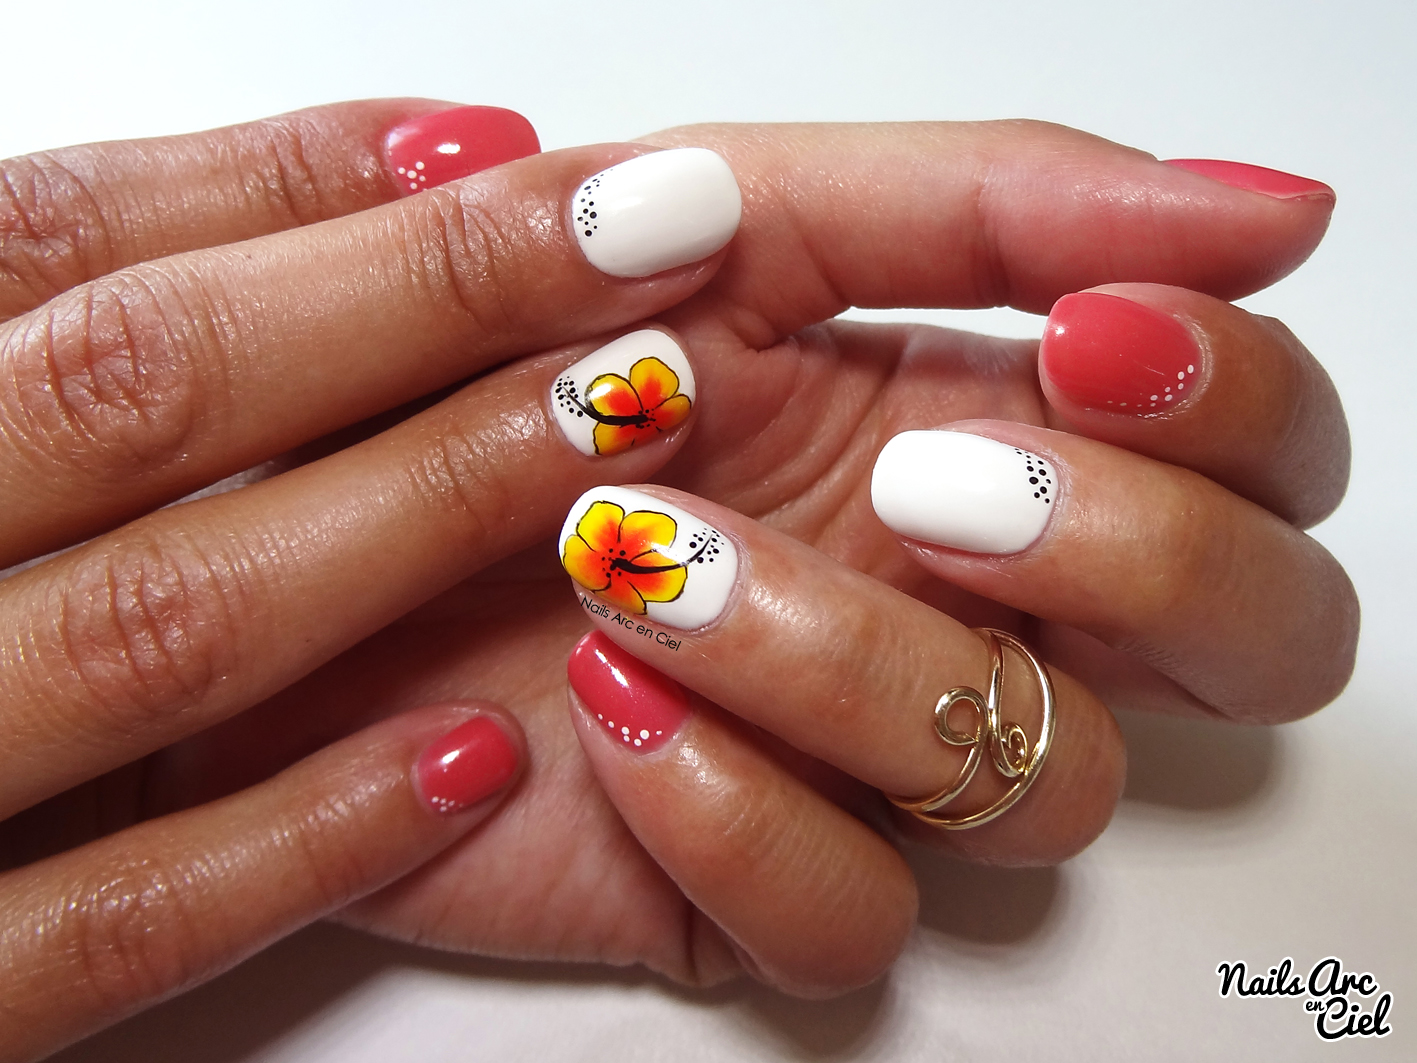 6. Hibiscus Nail Art Decals - wide 7